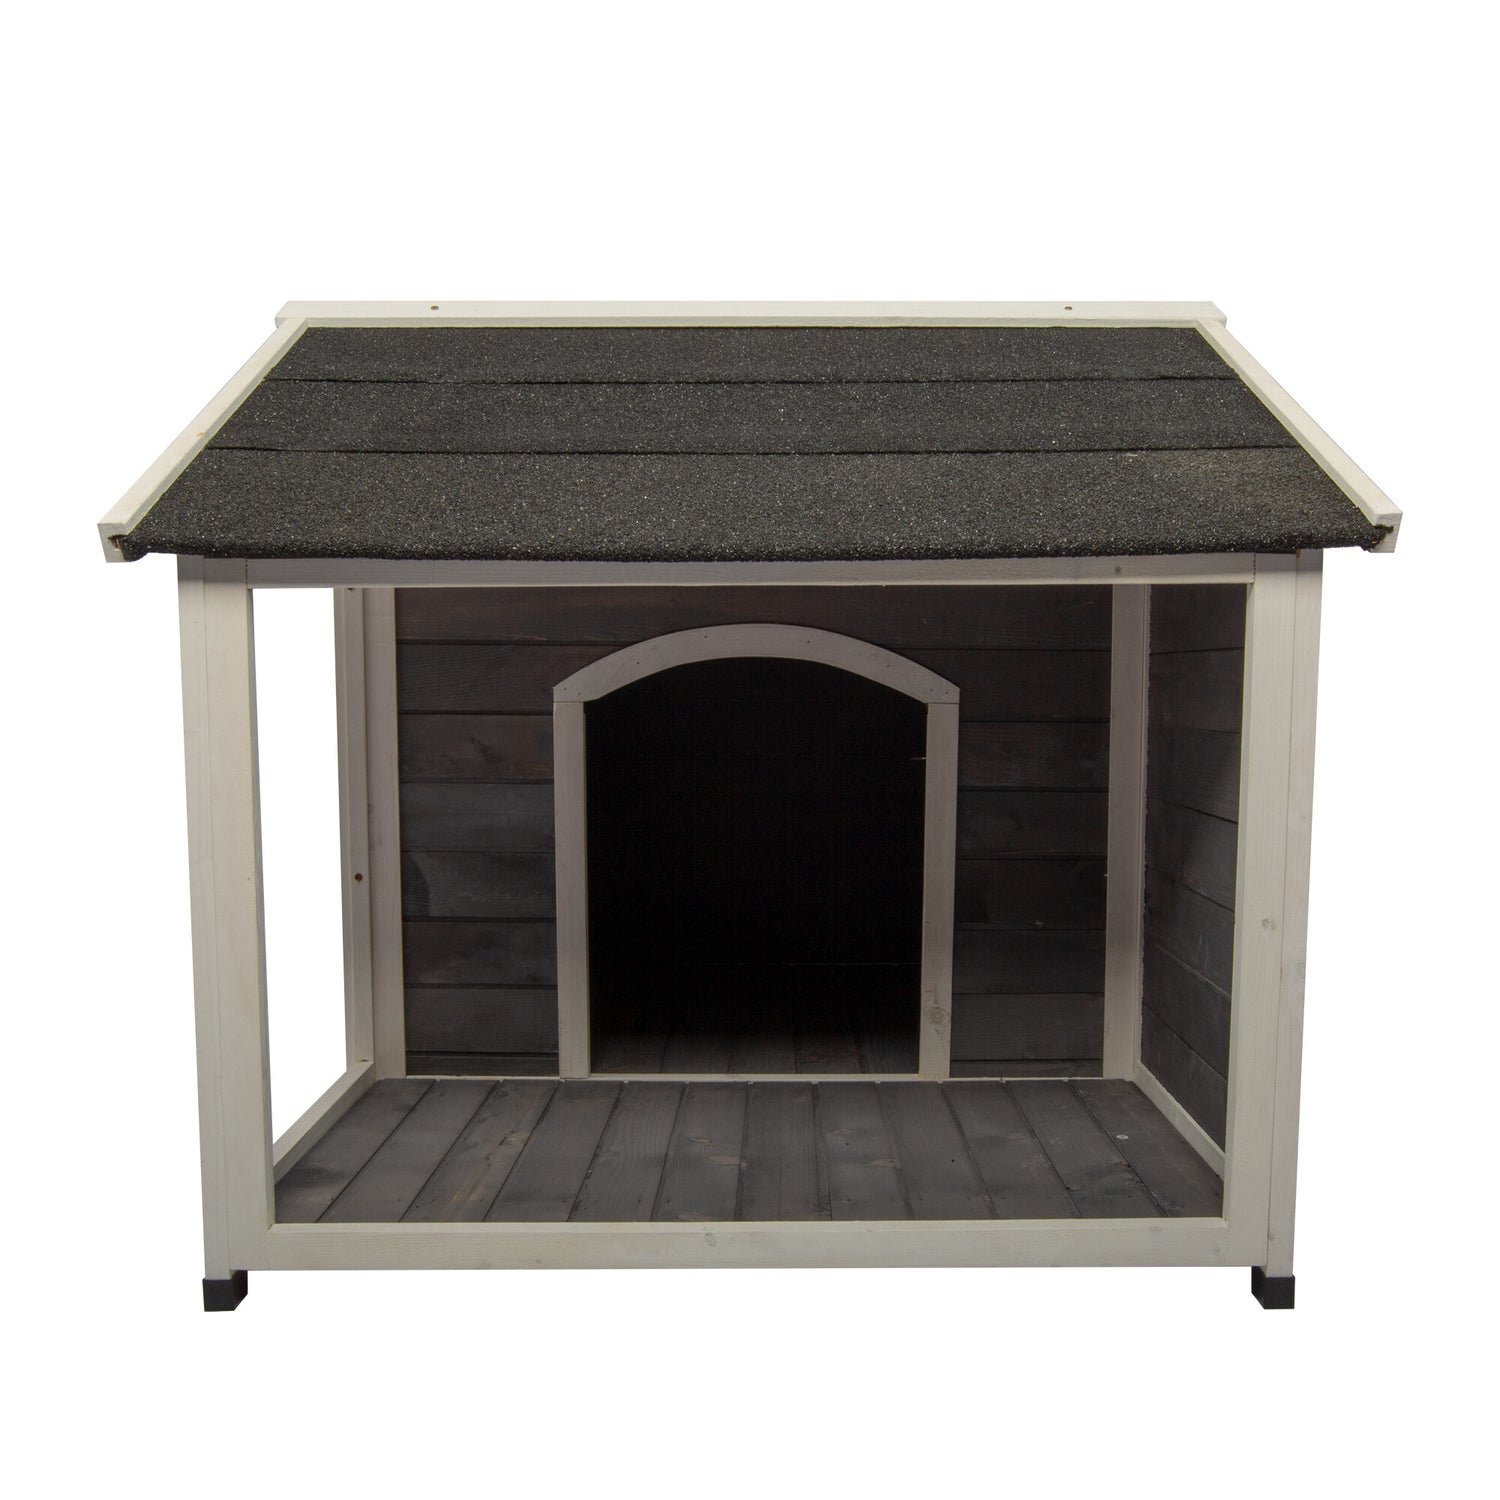 MASBEKTE Dog House Outdoor Medium Puppy Wooden Dog House Pet Shelter with Roof